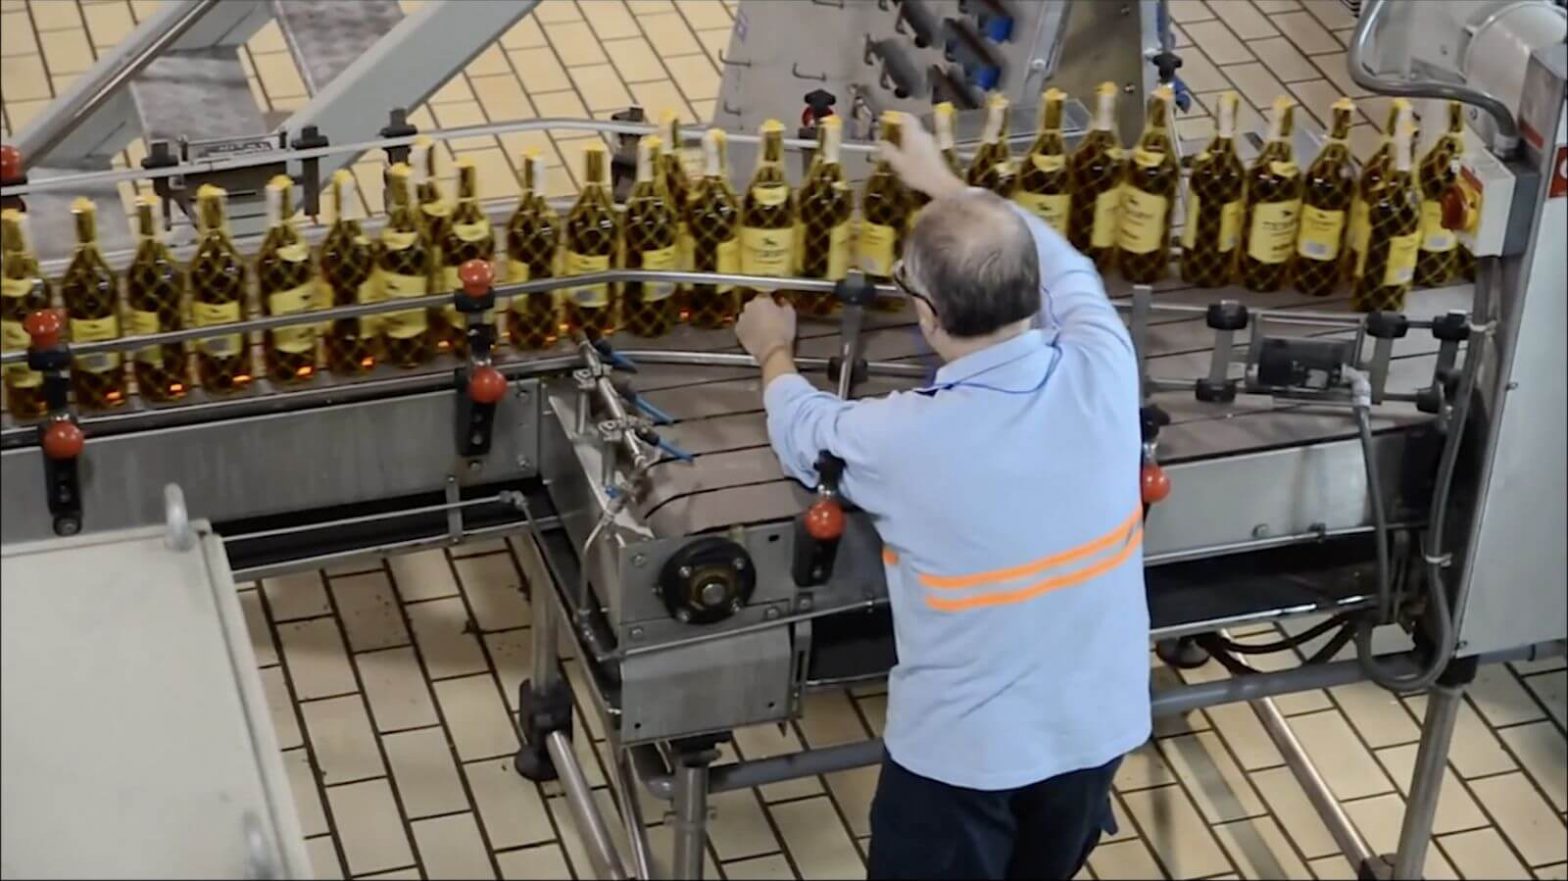 Emperador’s 1st quarter net income up 43% at P2.1B on strong international performance